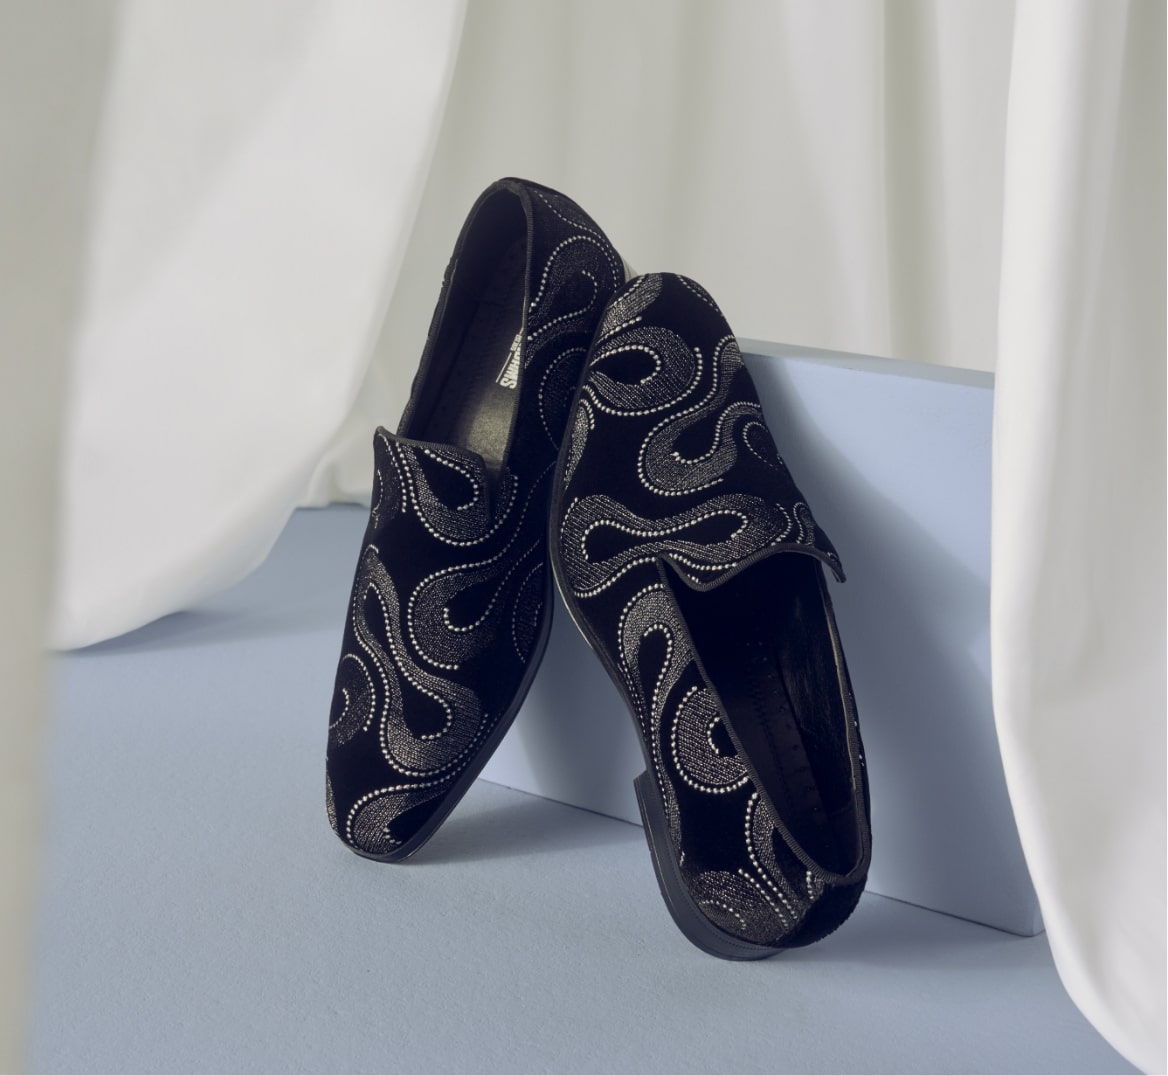 Click to shop Stacy Adams fashion styles. Image features the Swainson slipper. 